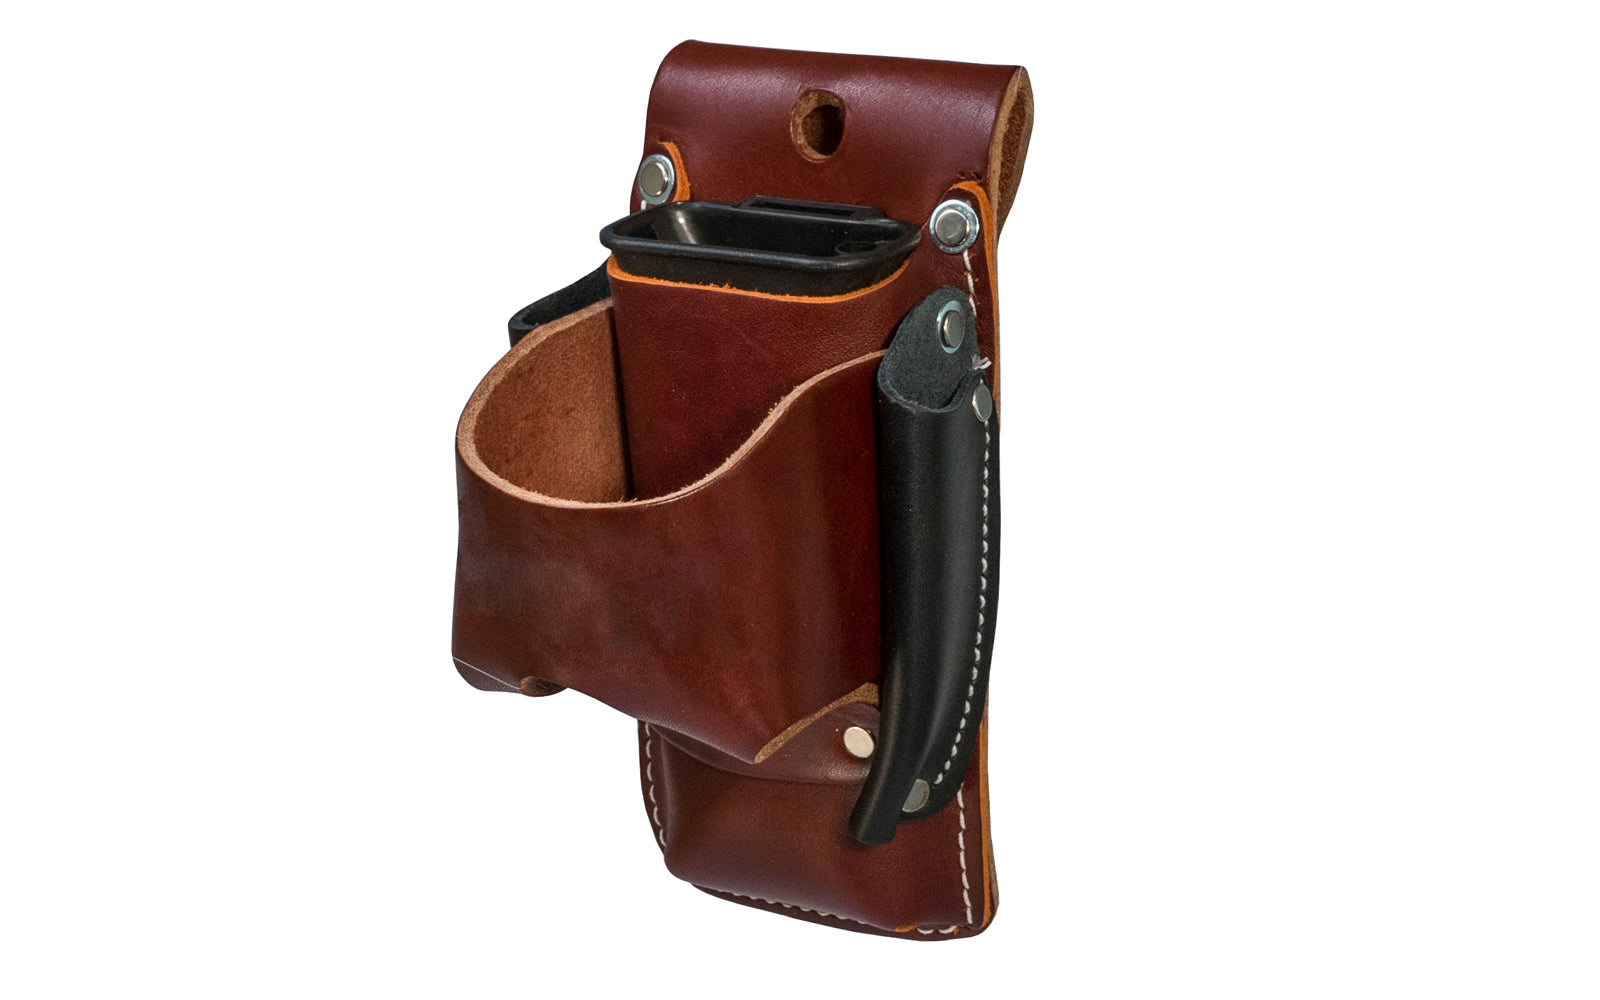 Made in USA - Occidental Leather 4-in-1 holder provides 4x the tool capacity in the space of one holder. Holders for tape, lumber crayon or screw driver, pencil - Riveted - Hammer Holster - Hand Made - 759244305807 - 4-in-1 Tool Holder Holster - Model 5522 - Fits up to a 3" work belt - Made of sturdy genuine leather